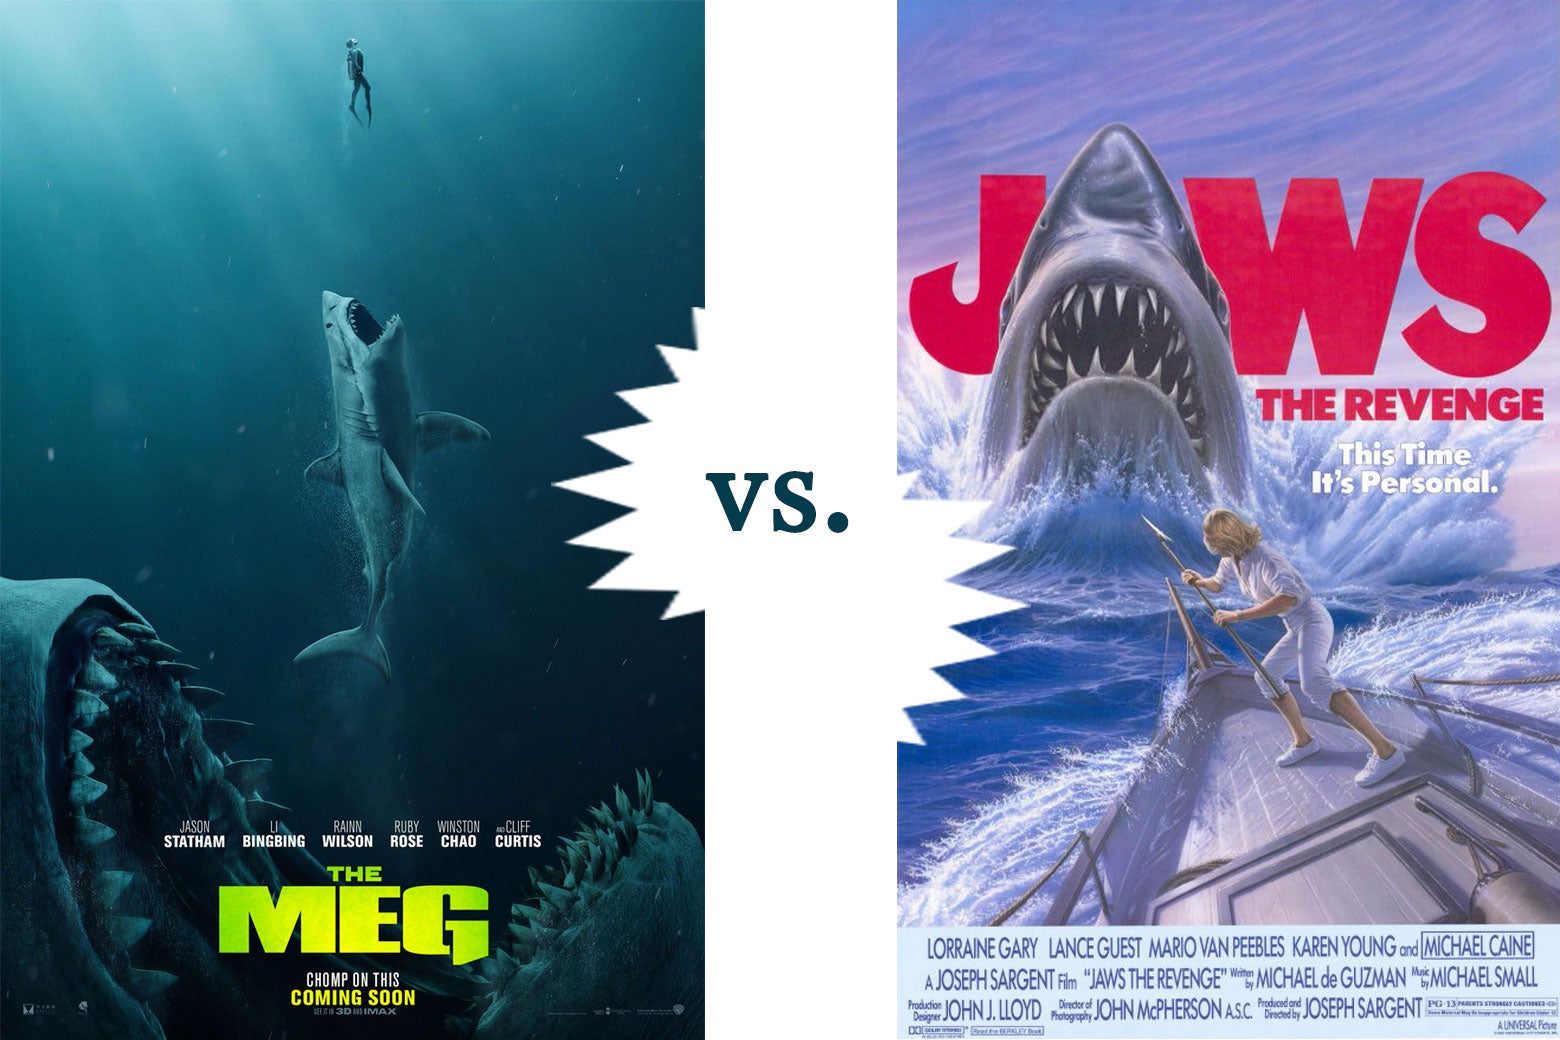 Posters for The Meg and Jaws: The Revenge set head-to-head.